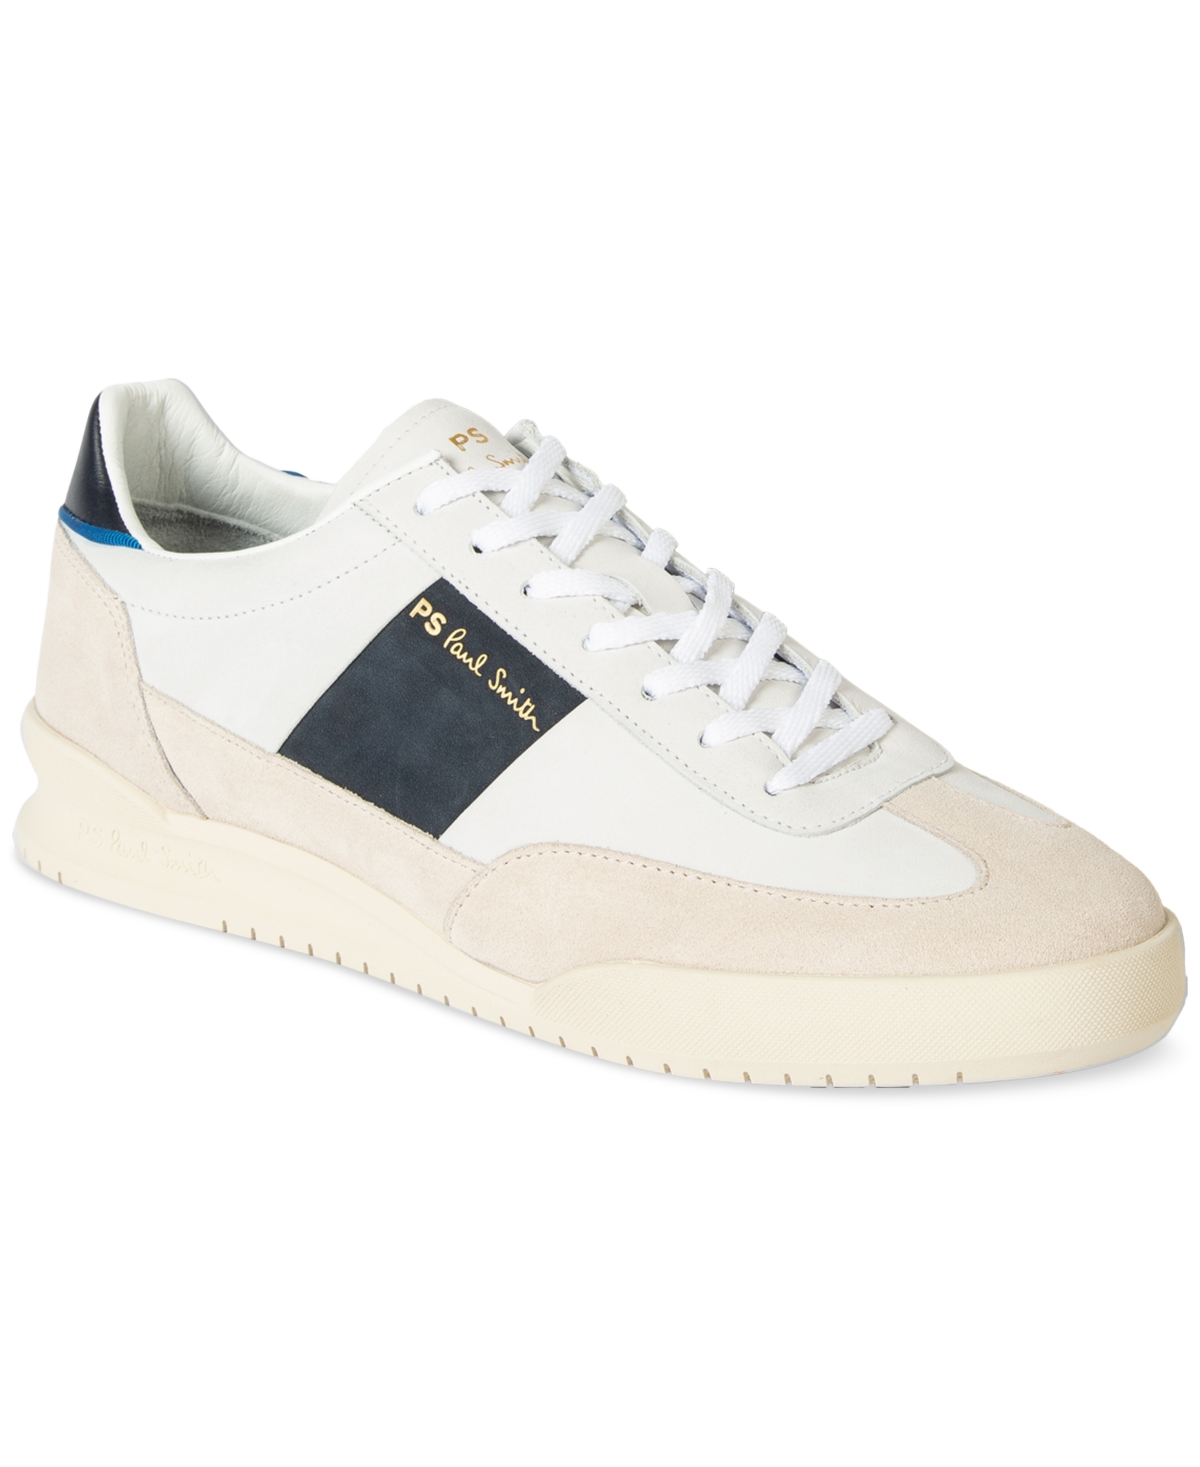 Men's Dover Mixed Leather Low-Top Sneaker - White